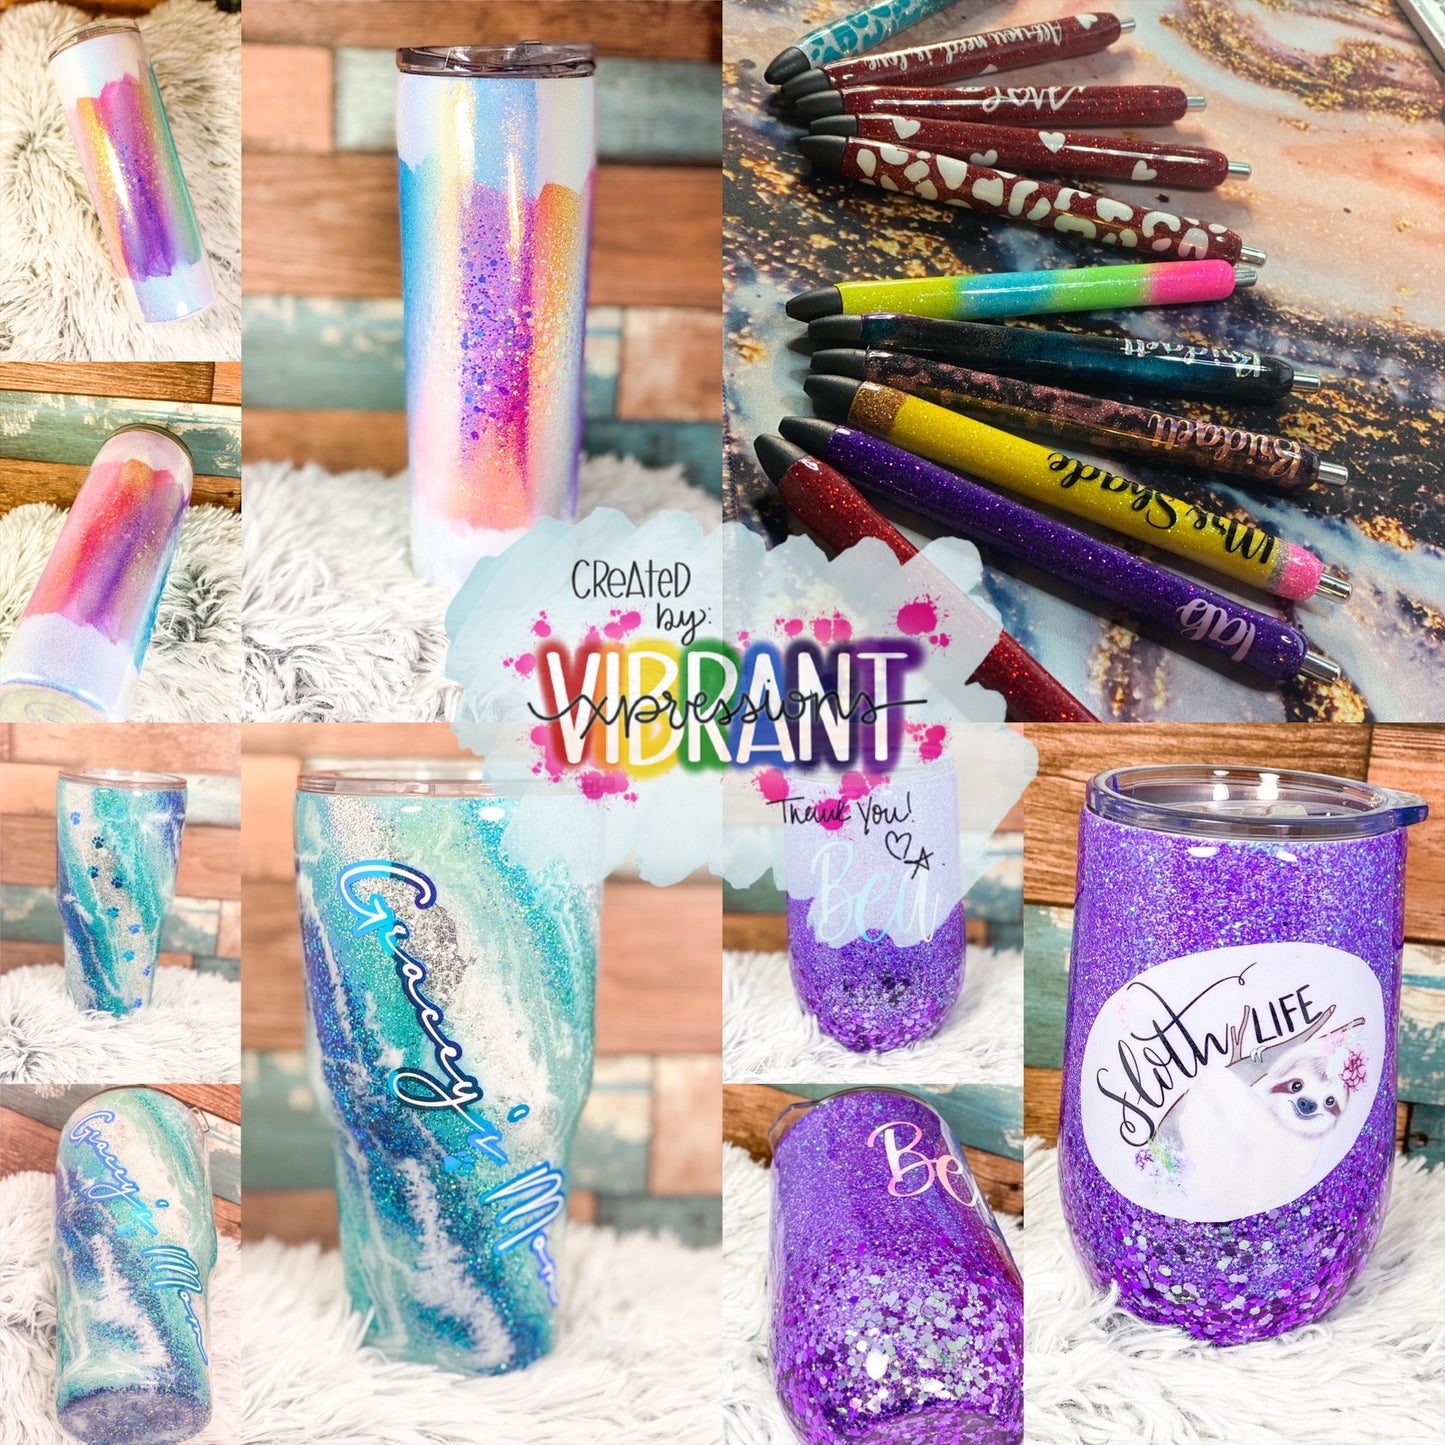 Vibrant Xpressions Gift Cards